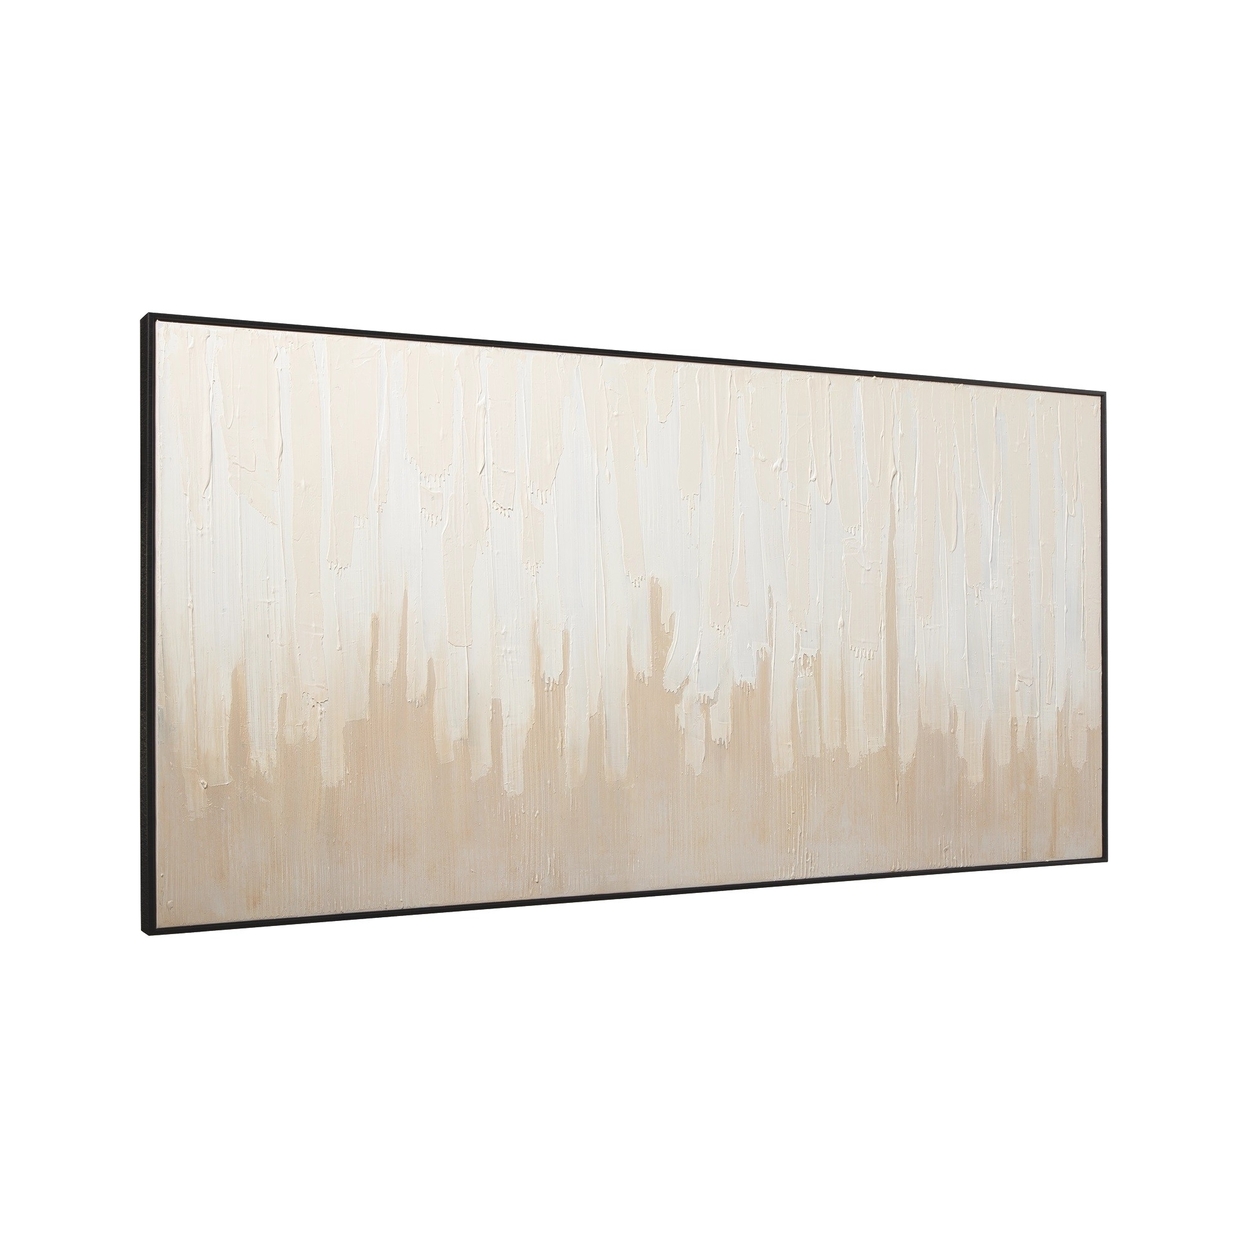 Rectangular Canvas Wall Art With Abstract Design, Beige And Off White- Saltoro Sherpi